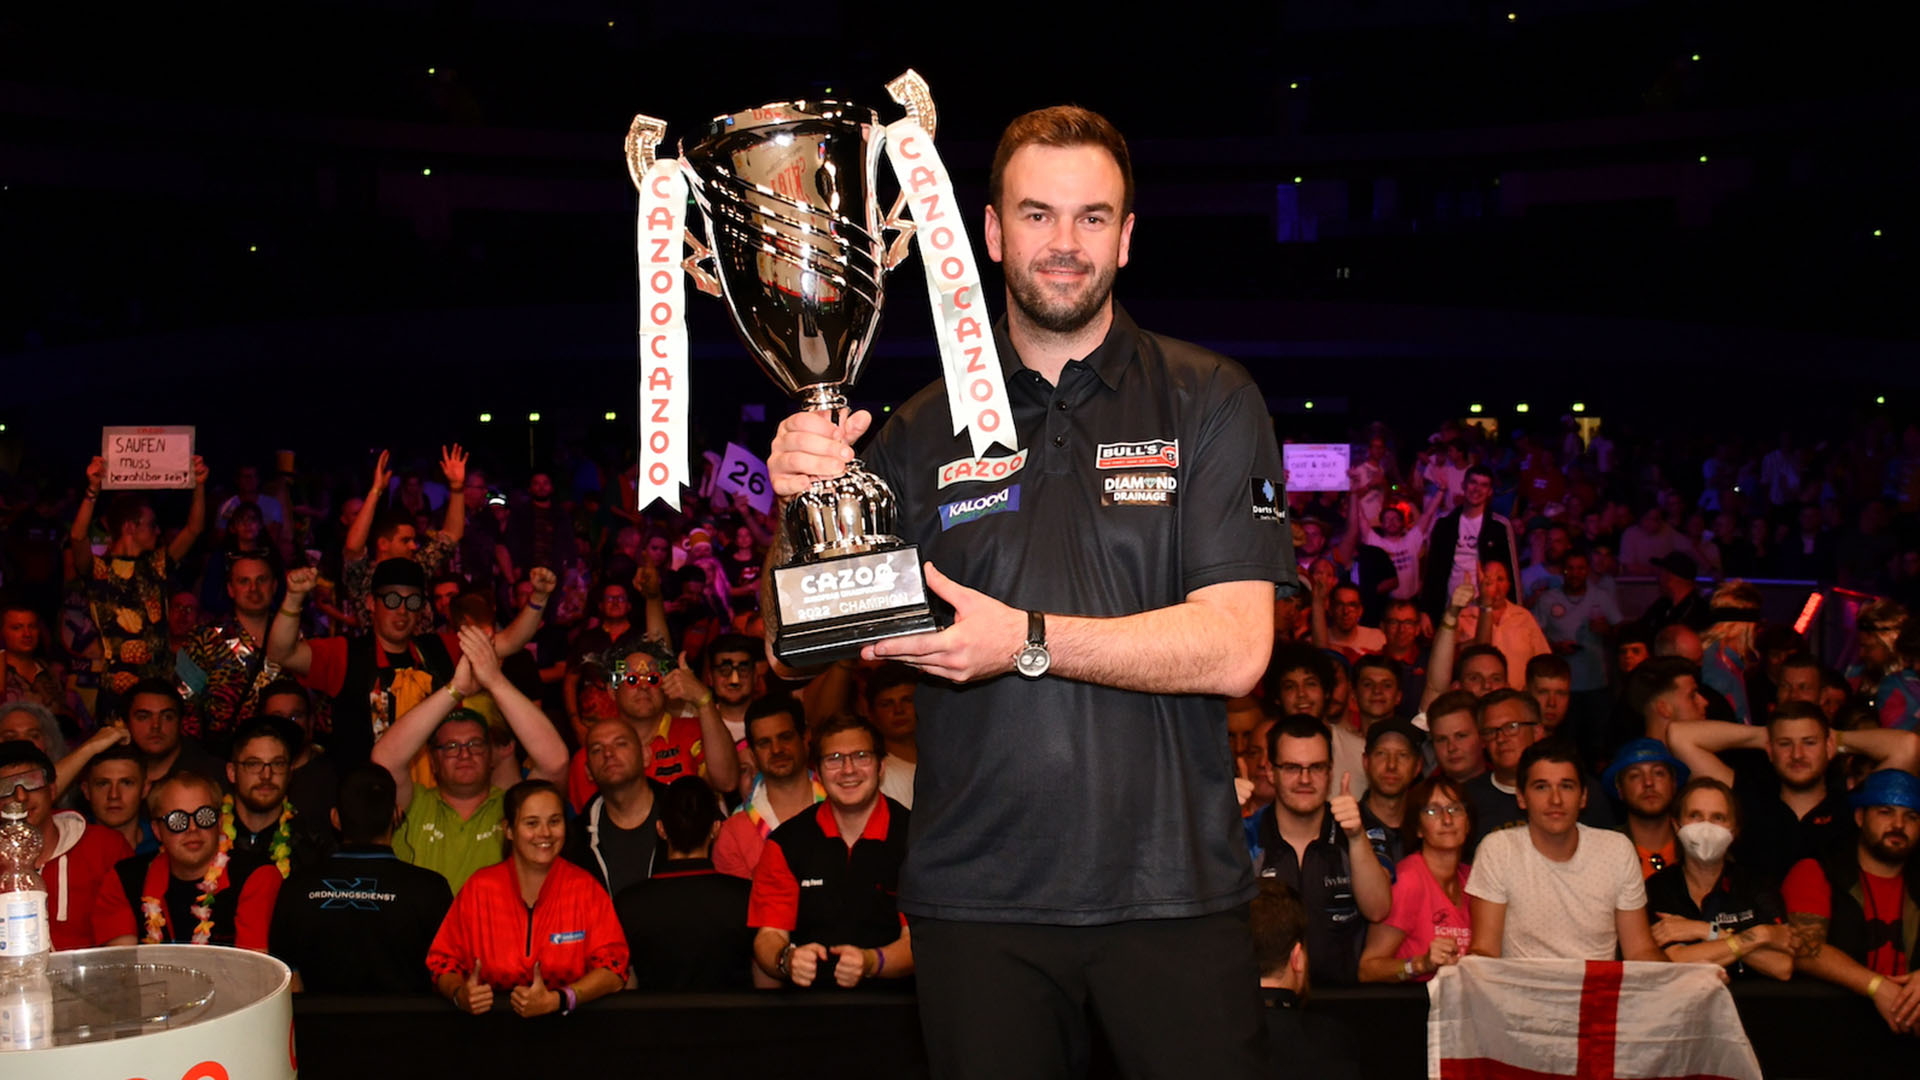 European Championship darts 2022 Draw, schedule, betting odds, results and live ITV4 coverage details